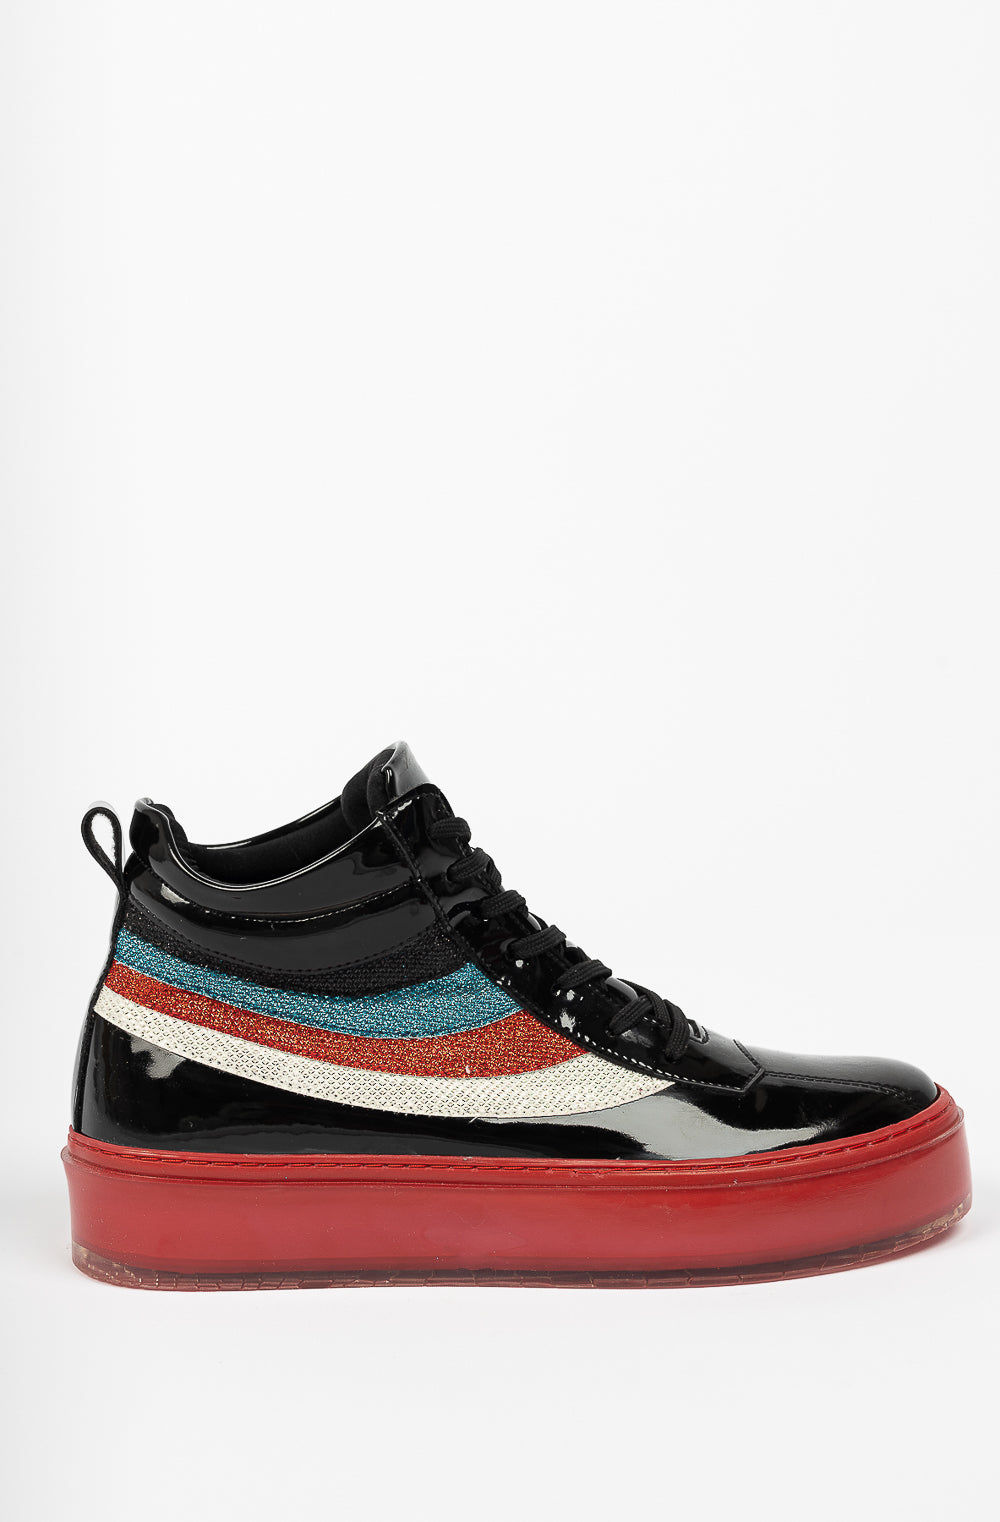 Majesty Black Red - Swagg Splash Sneakers